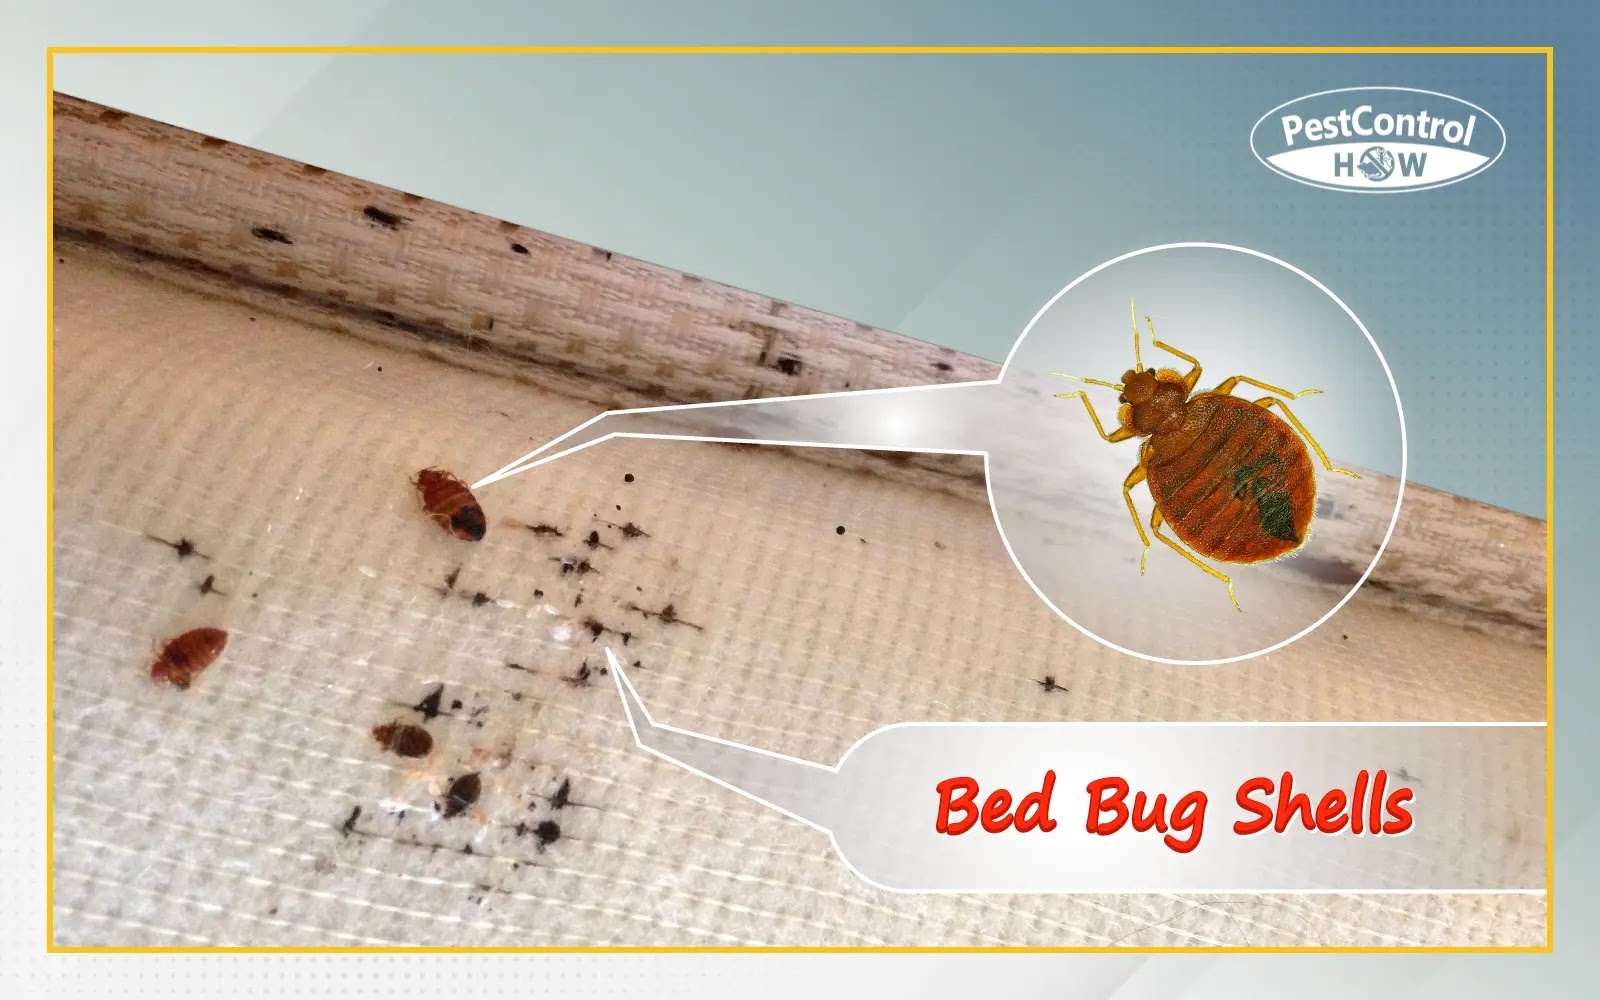 Appearance Of Bed Bug Shells